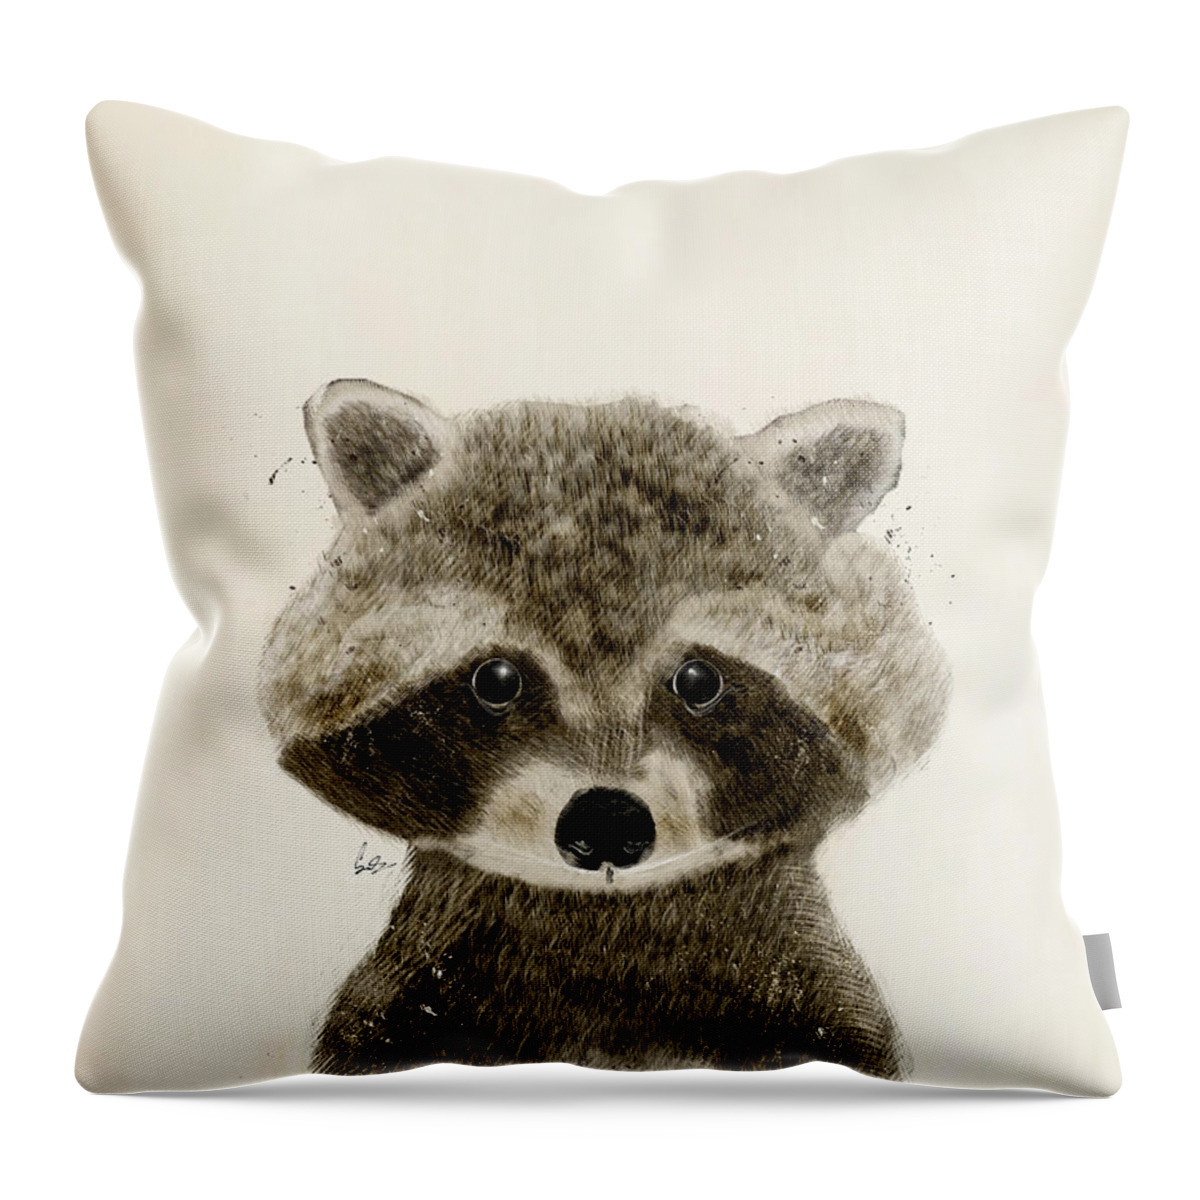 #faatoppicks Throw Pillow featuring the painting Little Raccoon by Bri Buckley